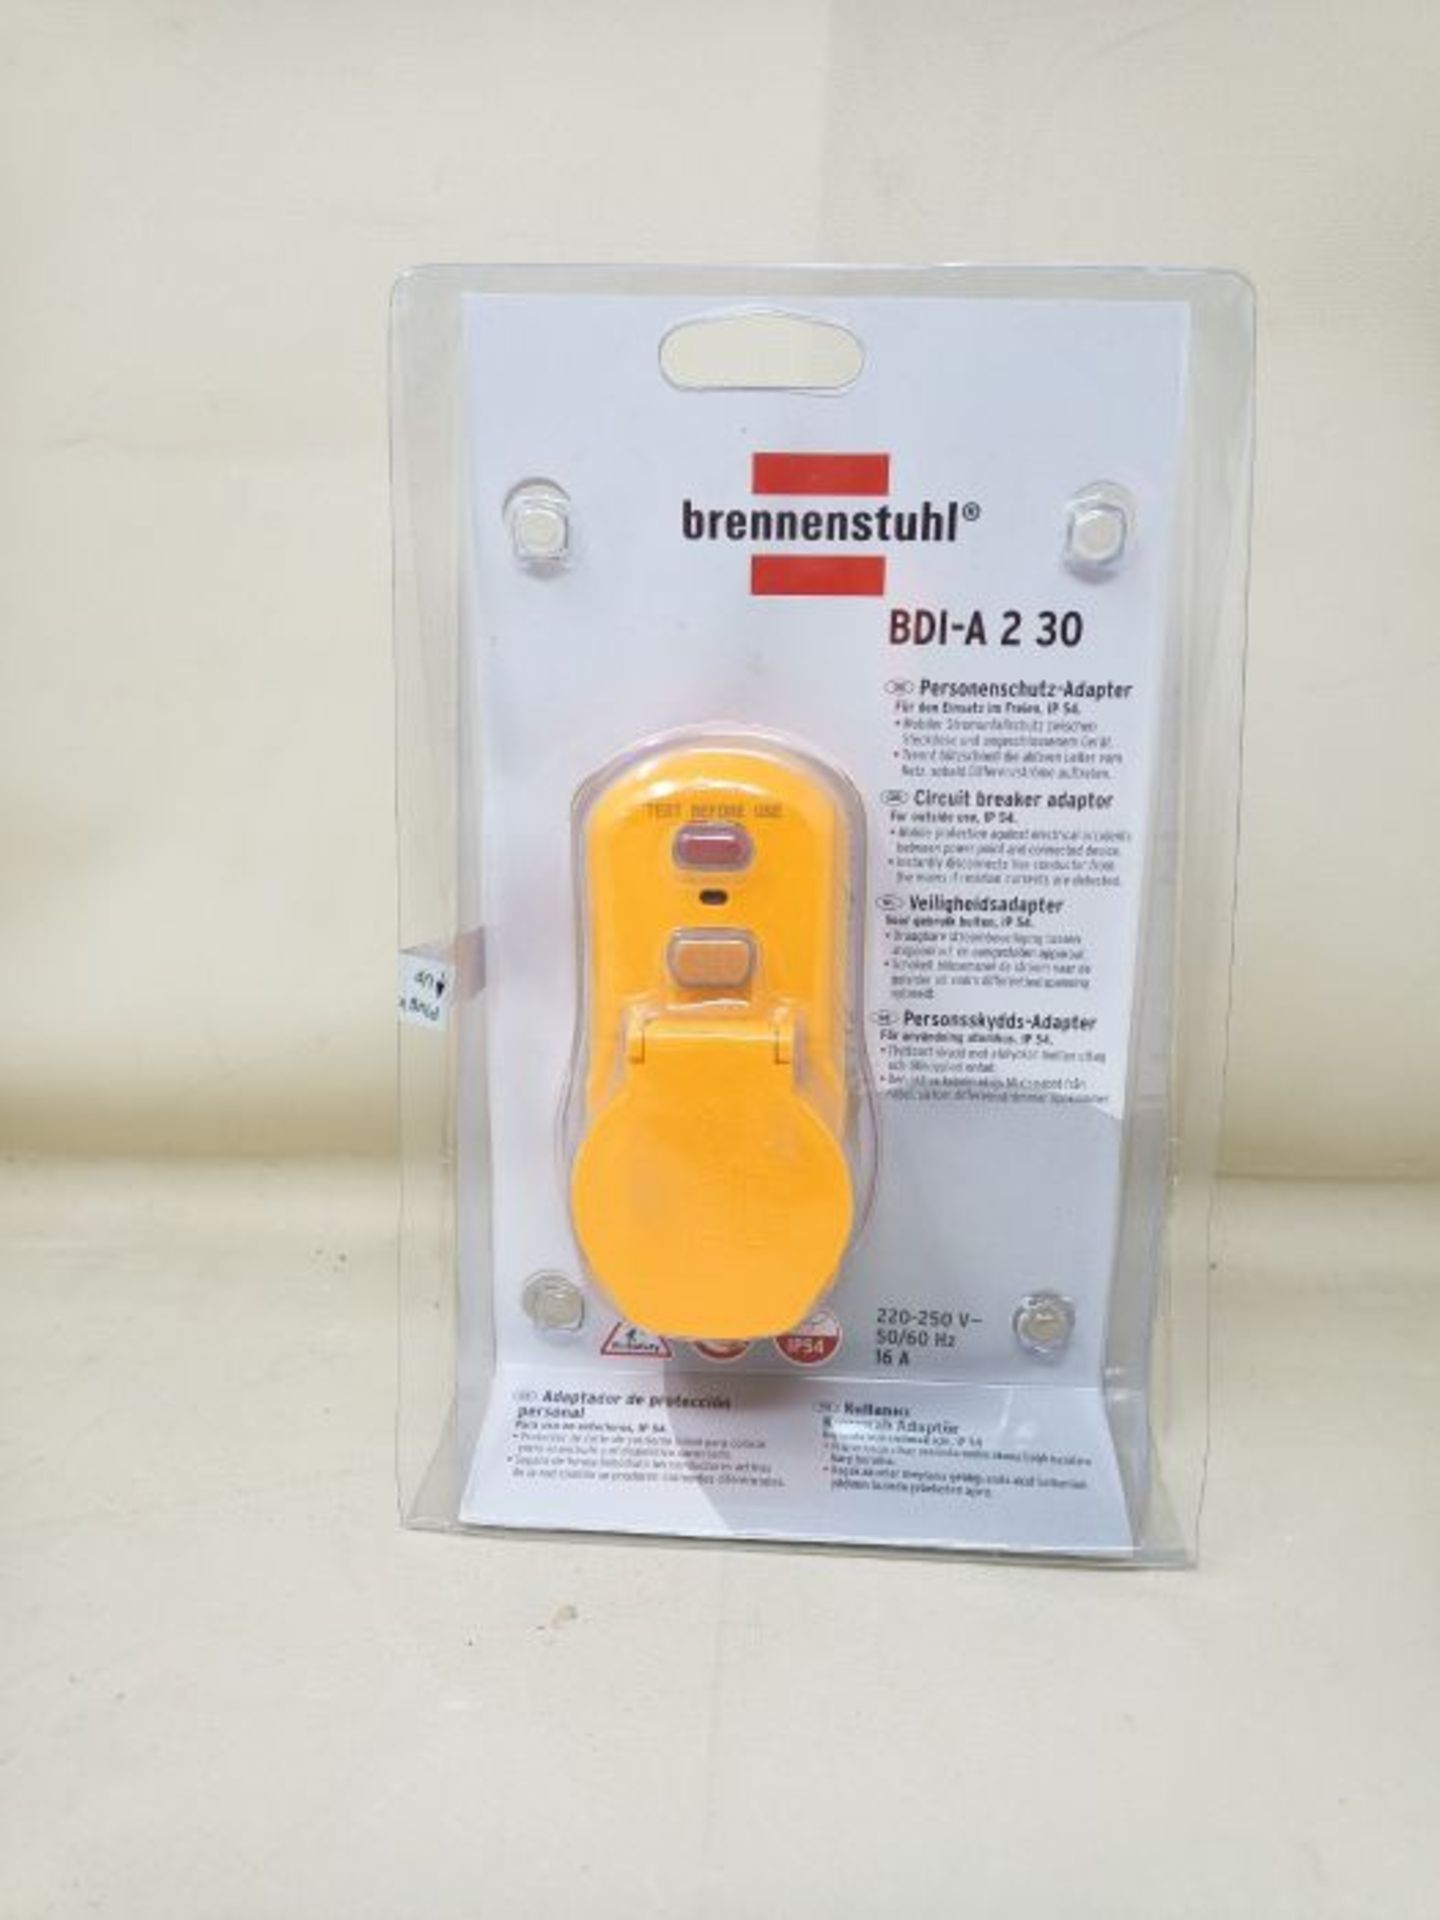 Brennenstuhl 1290660 Adapter of Protection People bdi-a 2 30 IP54 - Image 2 of 3